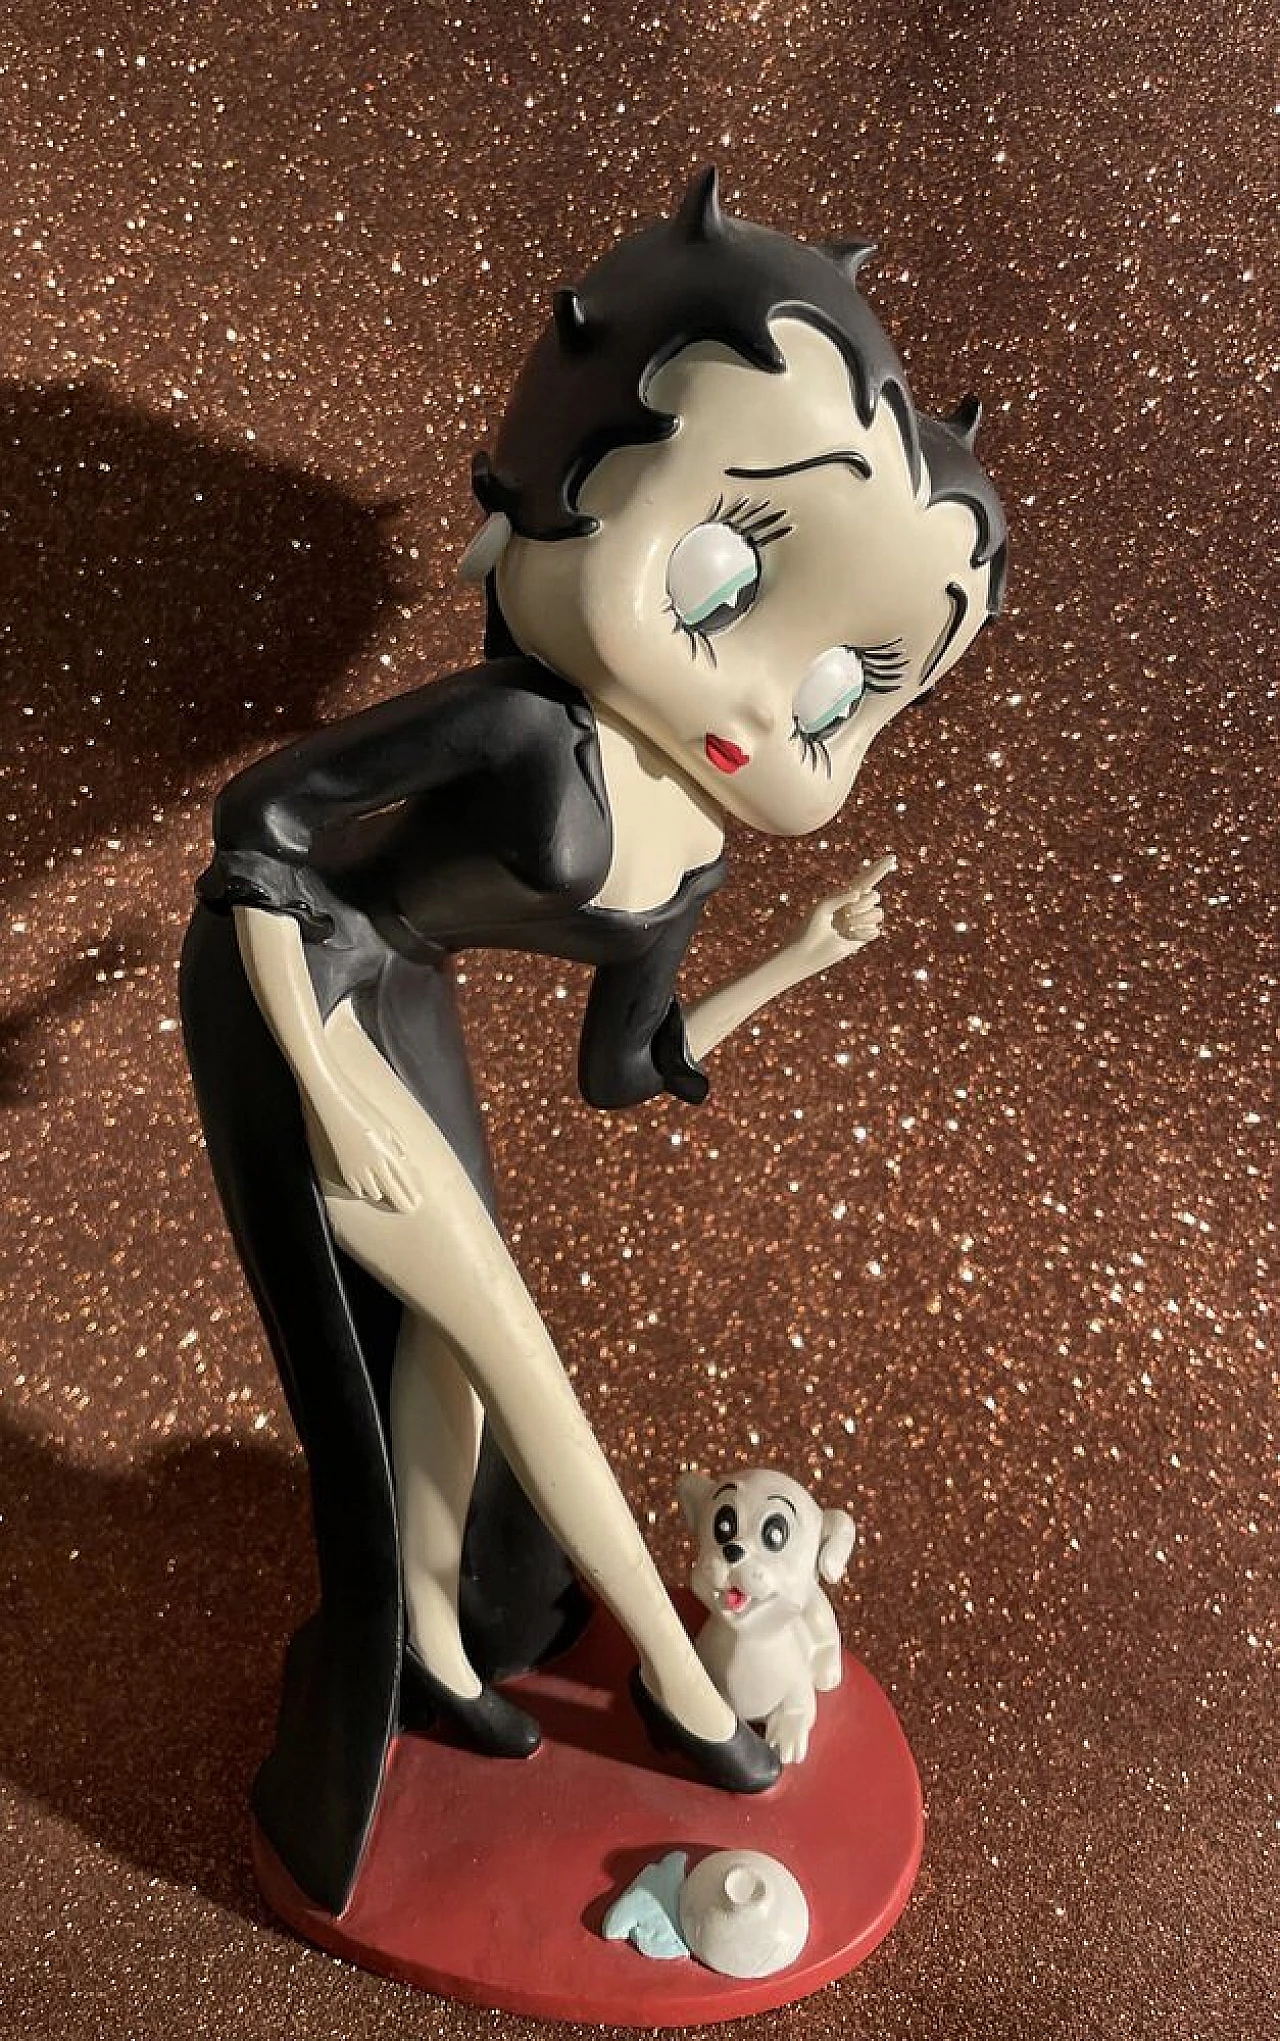 Betty Boop collectible figurine with black dress and small dog by Fleischer Studios, 2007 1